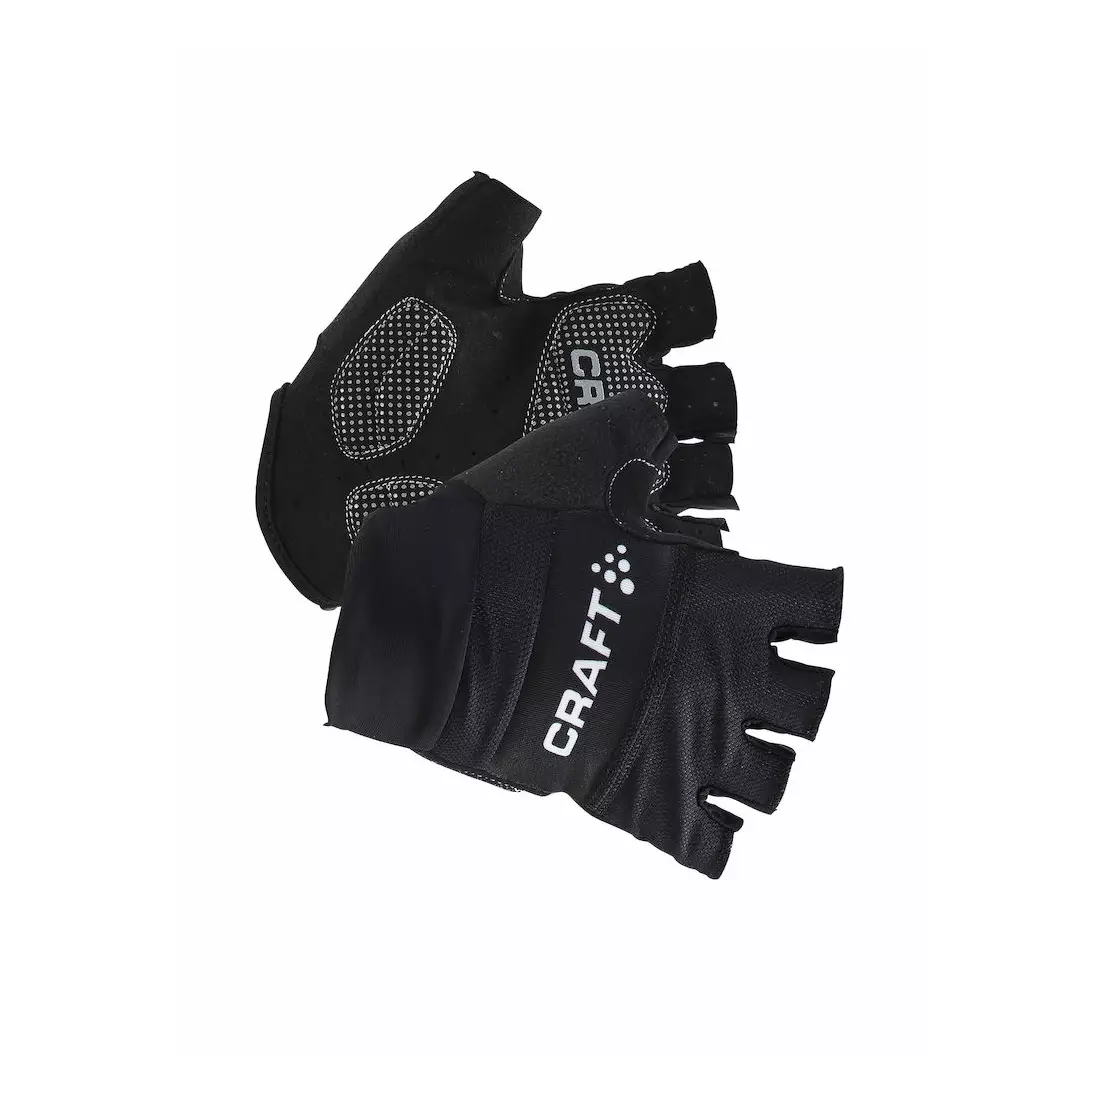 CRAFT CLASSIC GLOVE men's cycling gloves 1903304-9999